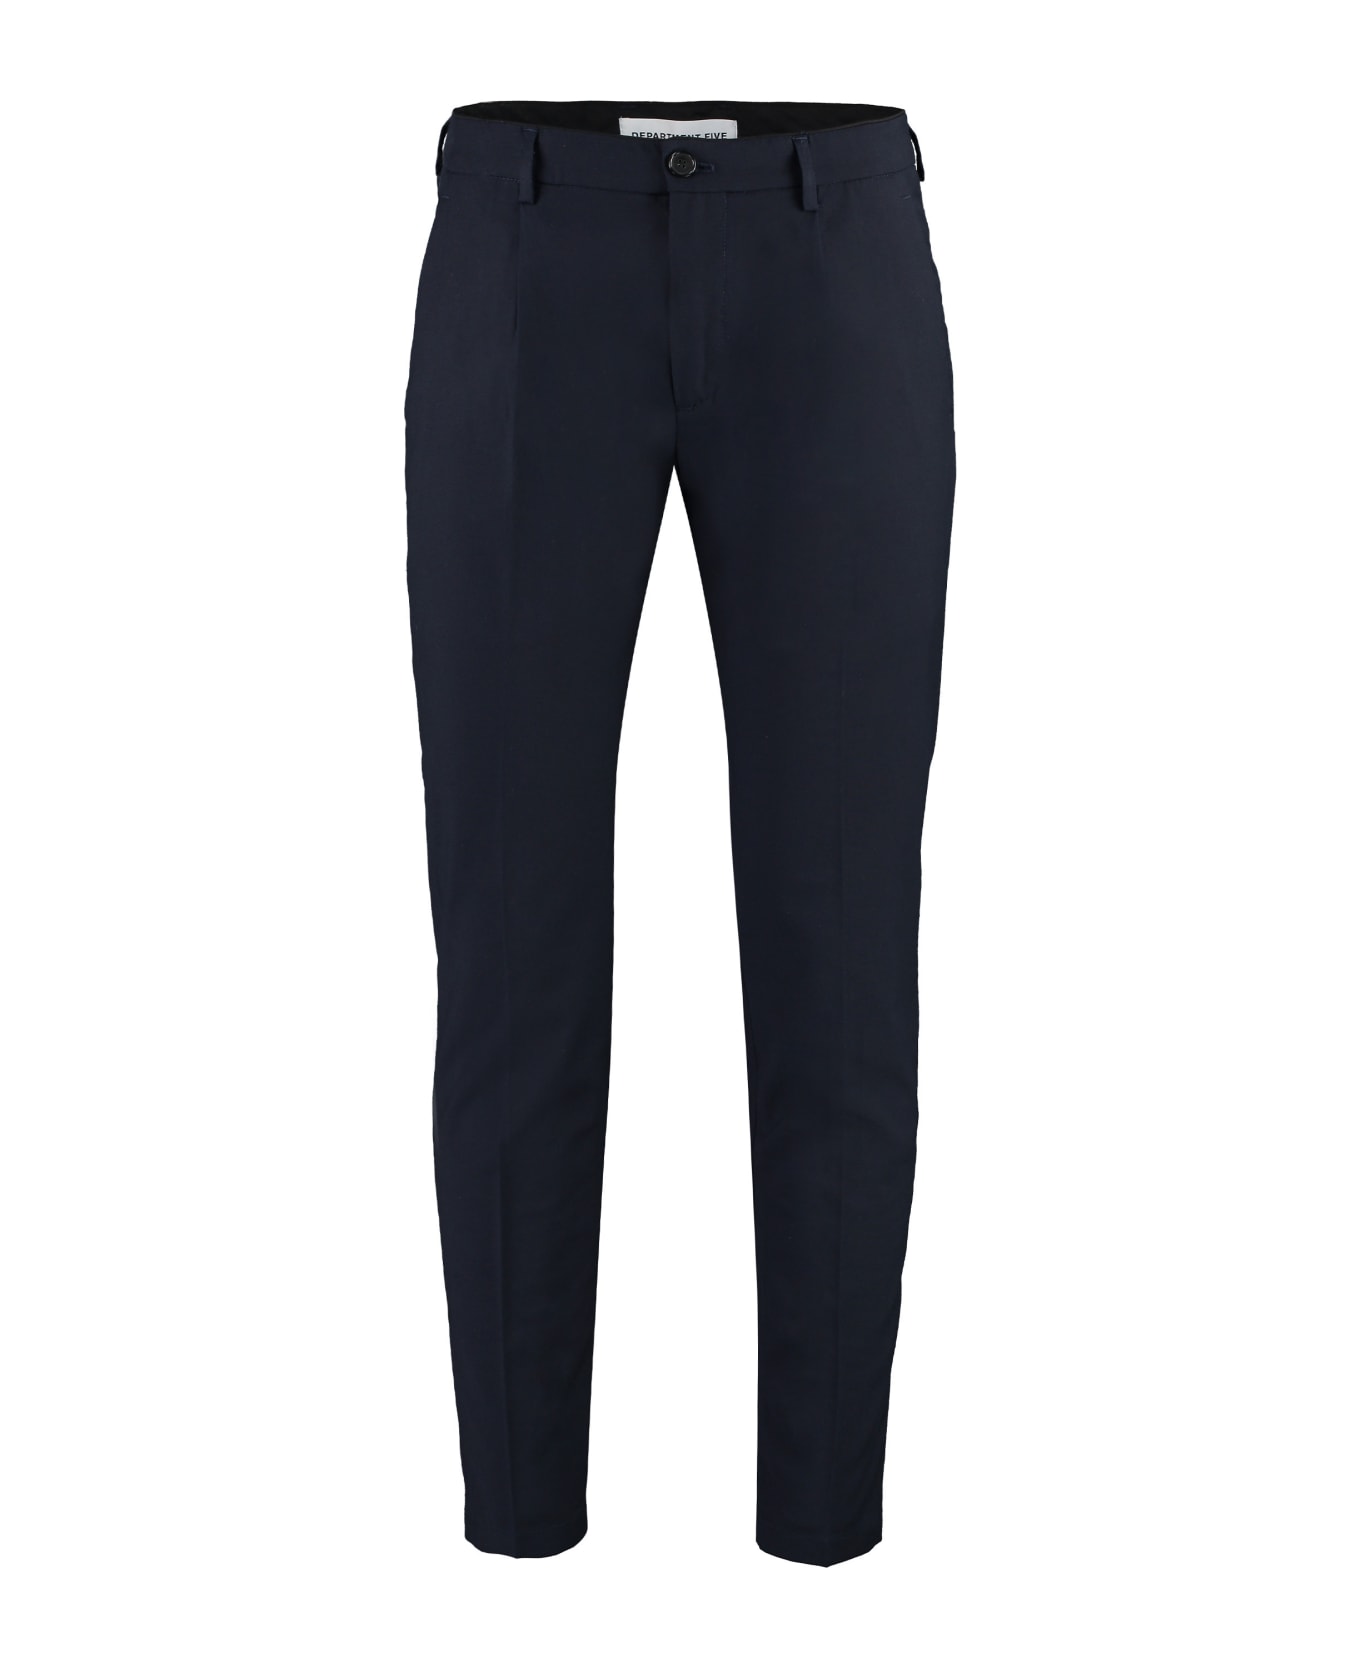 Department Five Prince Chino Pants - NAVY